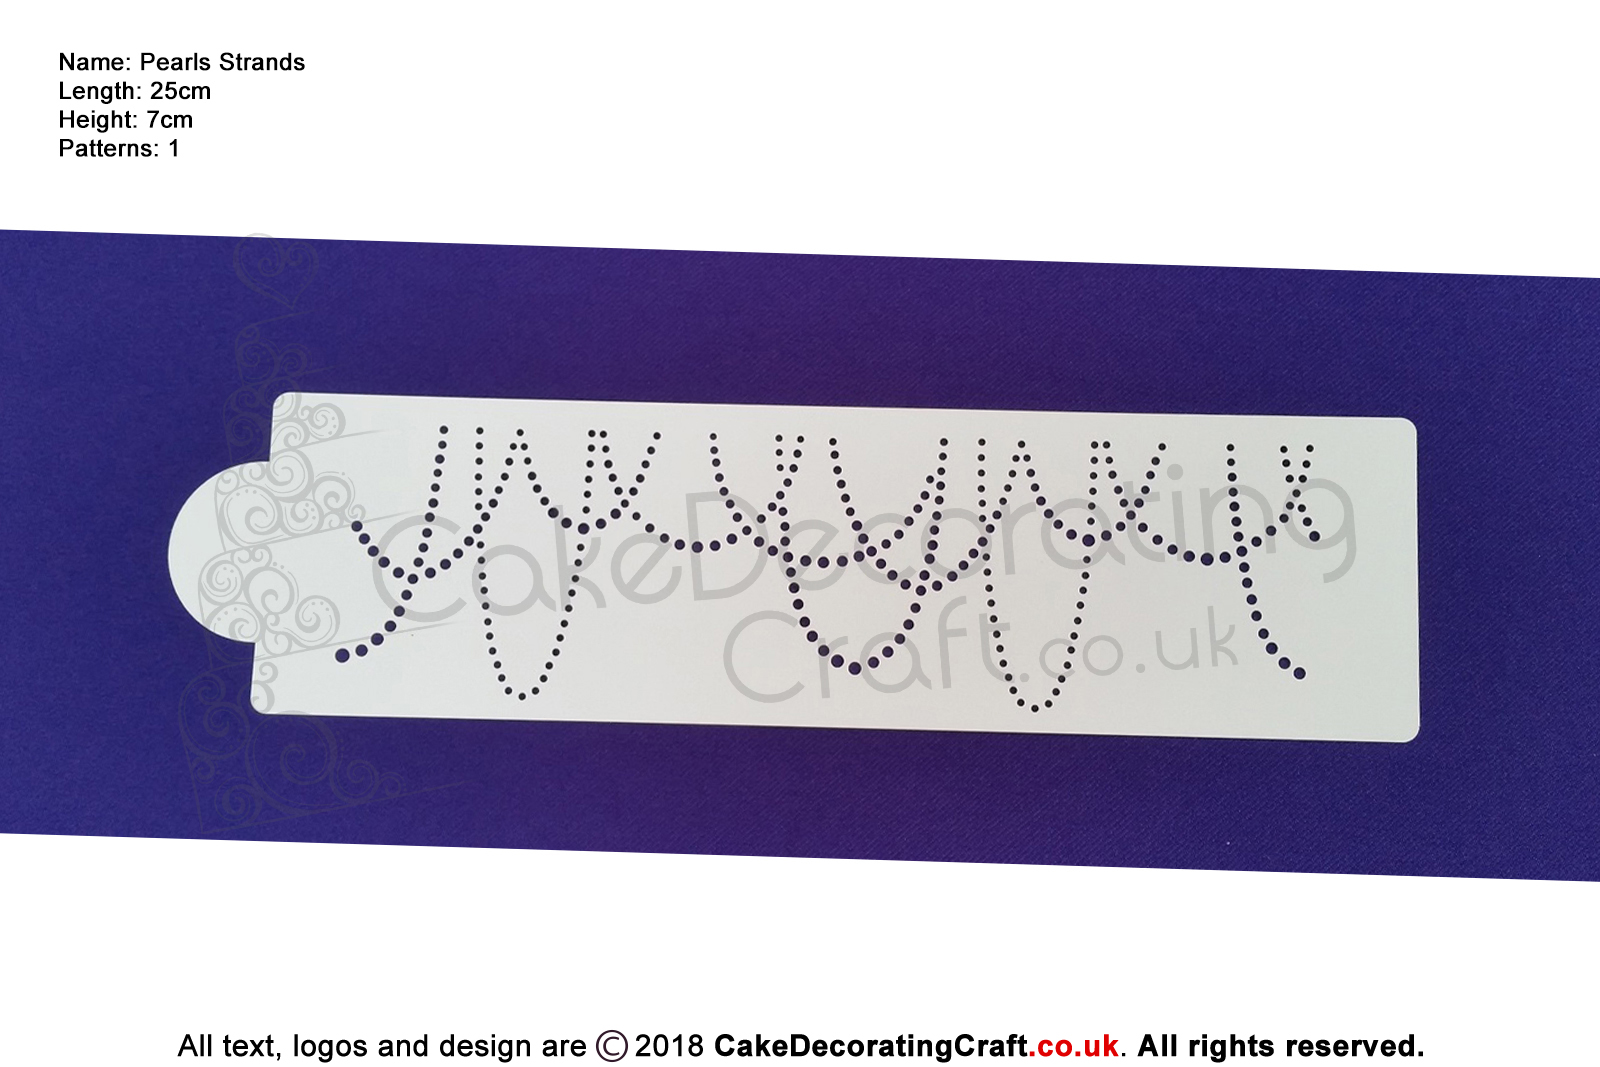 Pearls Strands Stencil | Air Brush Stenciling | Cake and Cupcake Decorating Craft Tool